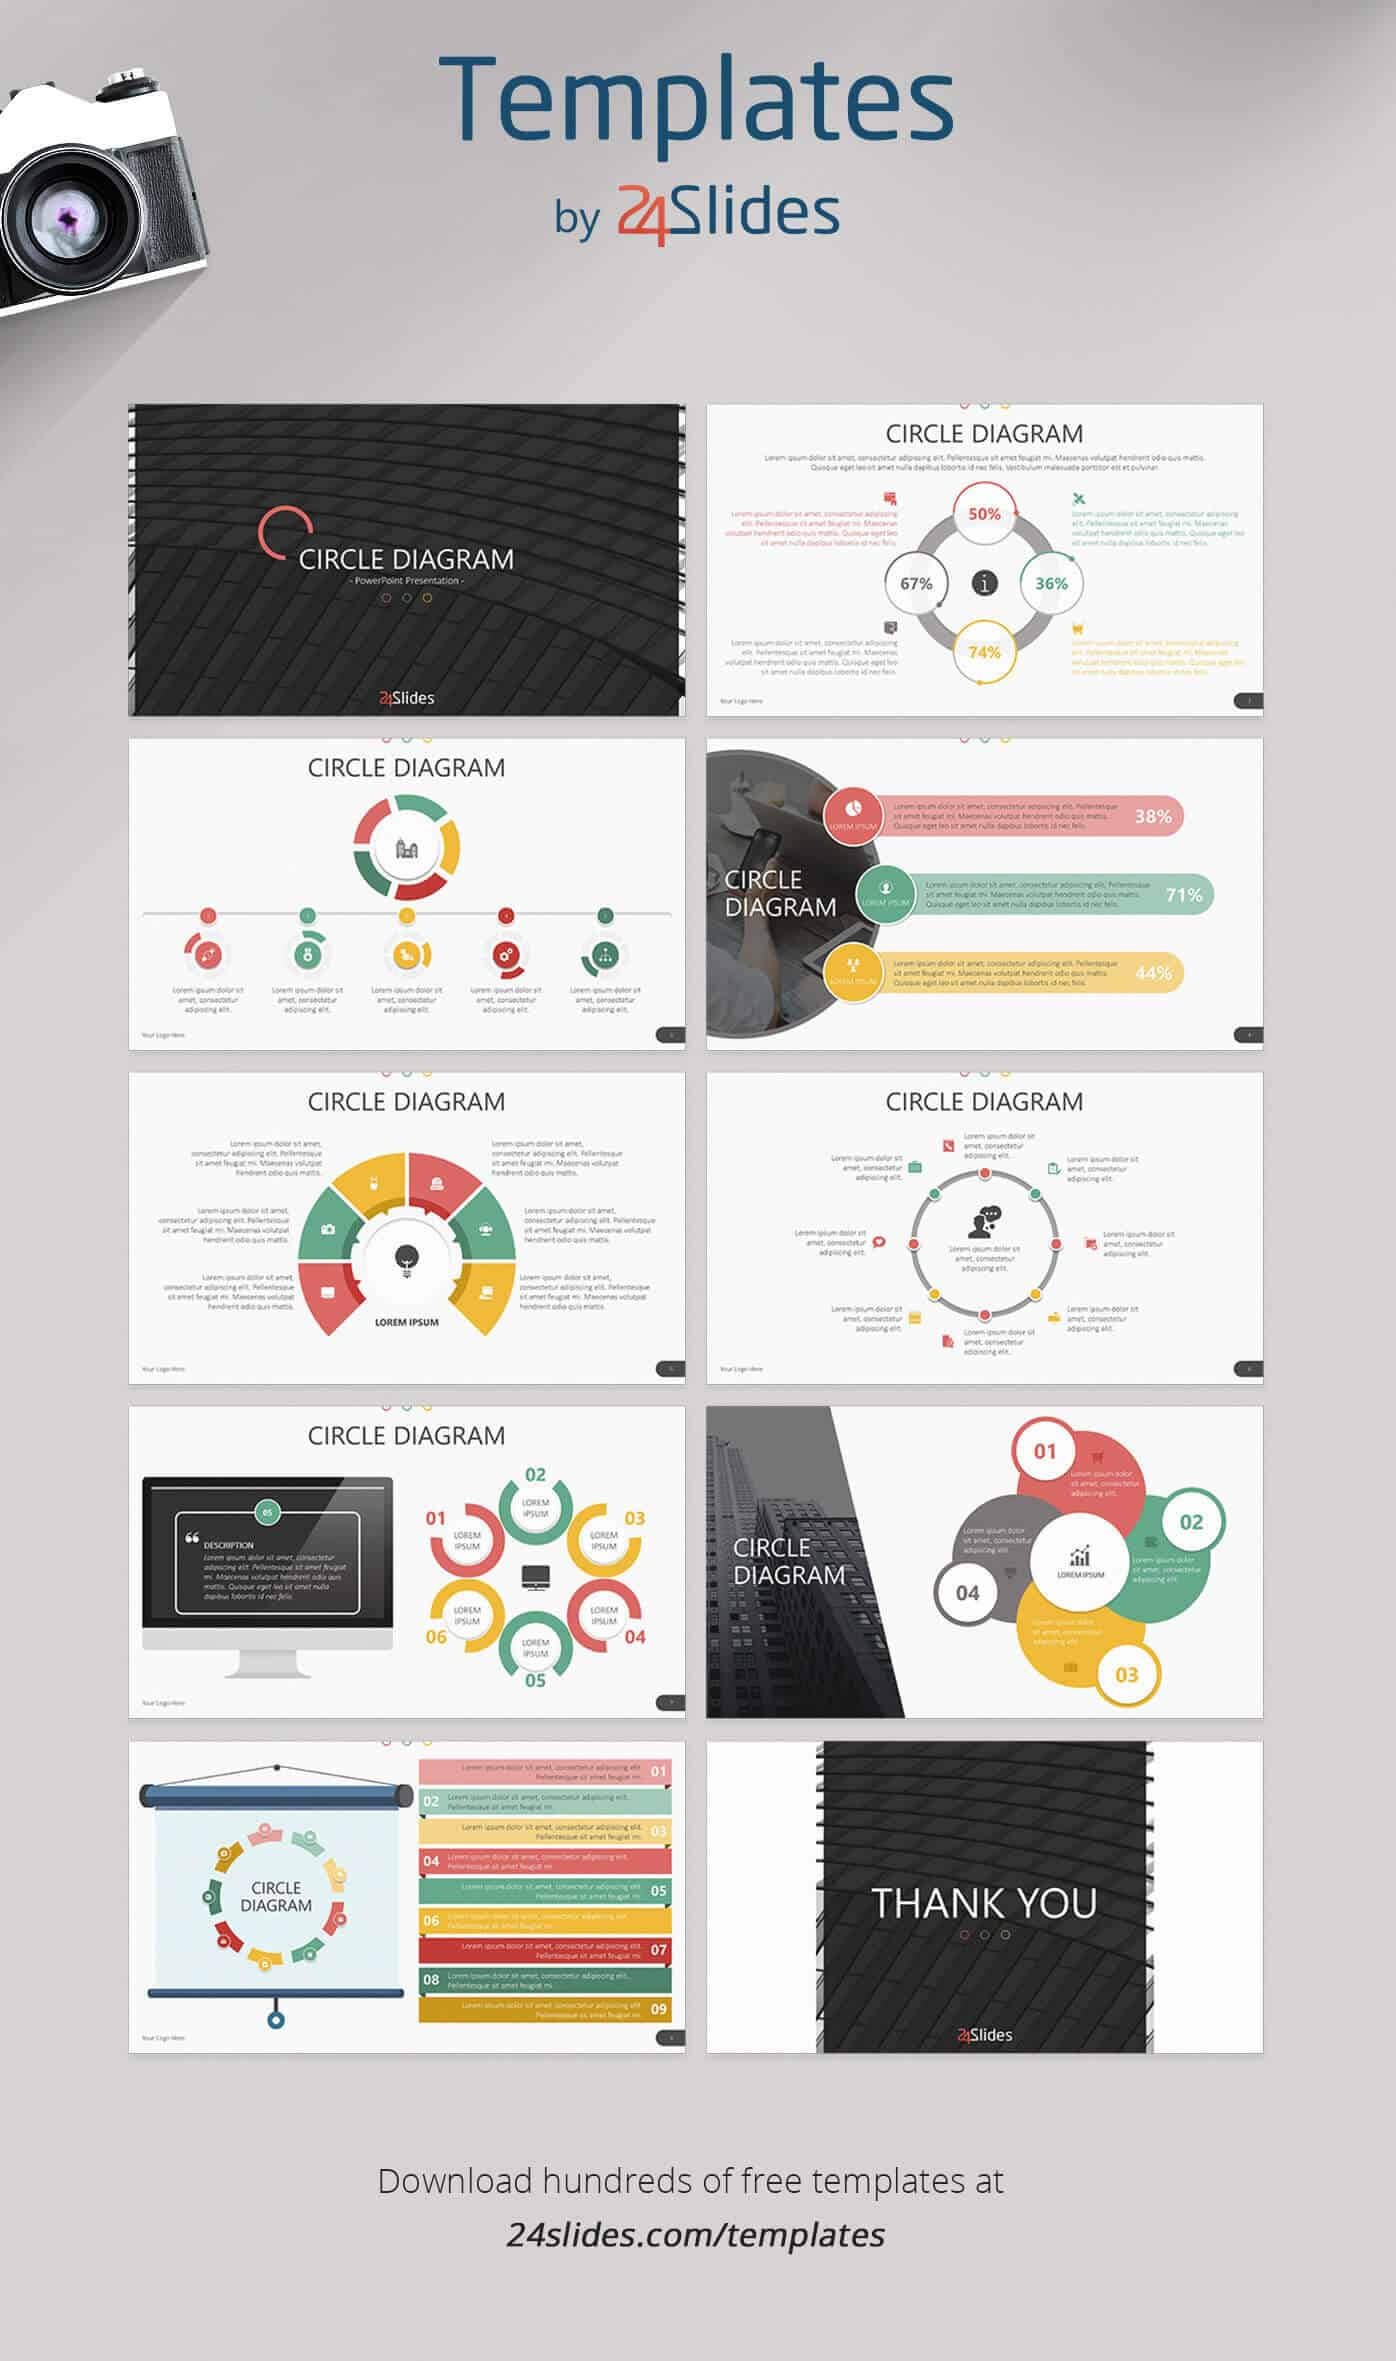 15 Fun And Colorful Free Powerpoint Templates | Present Better For Powerpoint Photo Slideshow Template